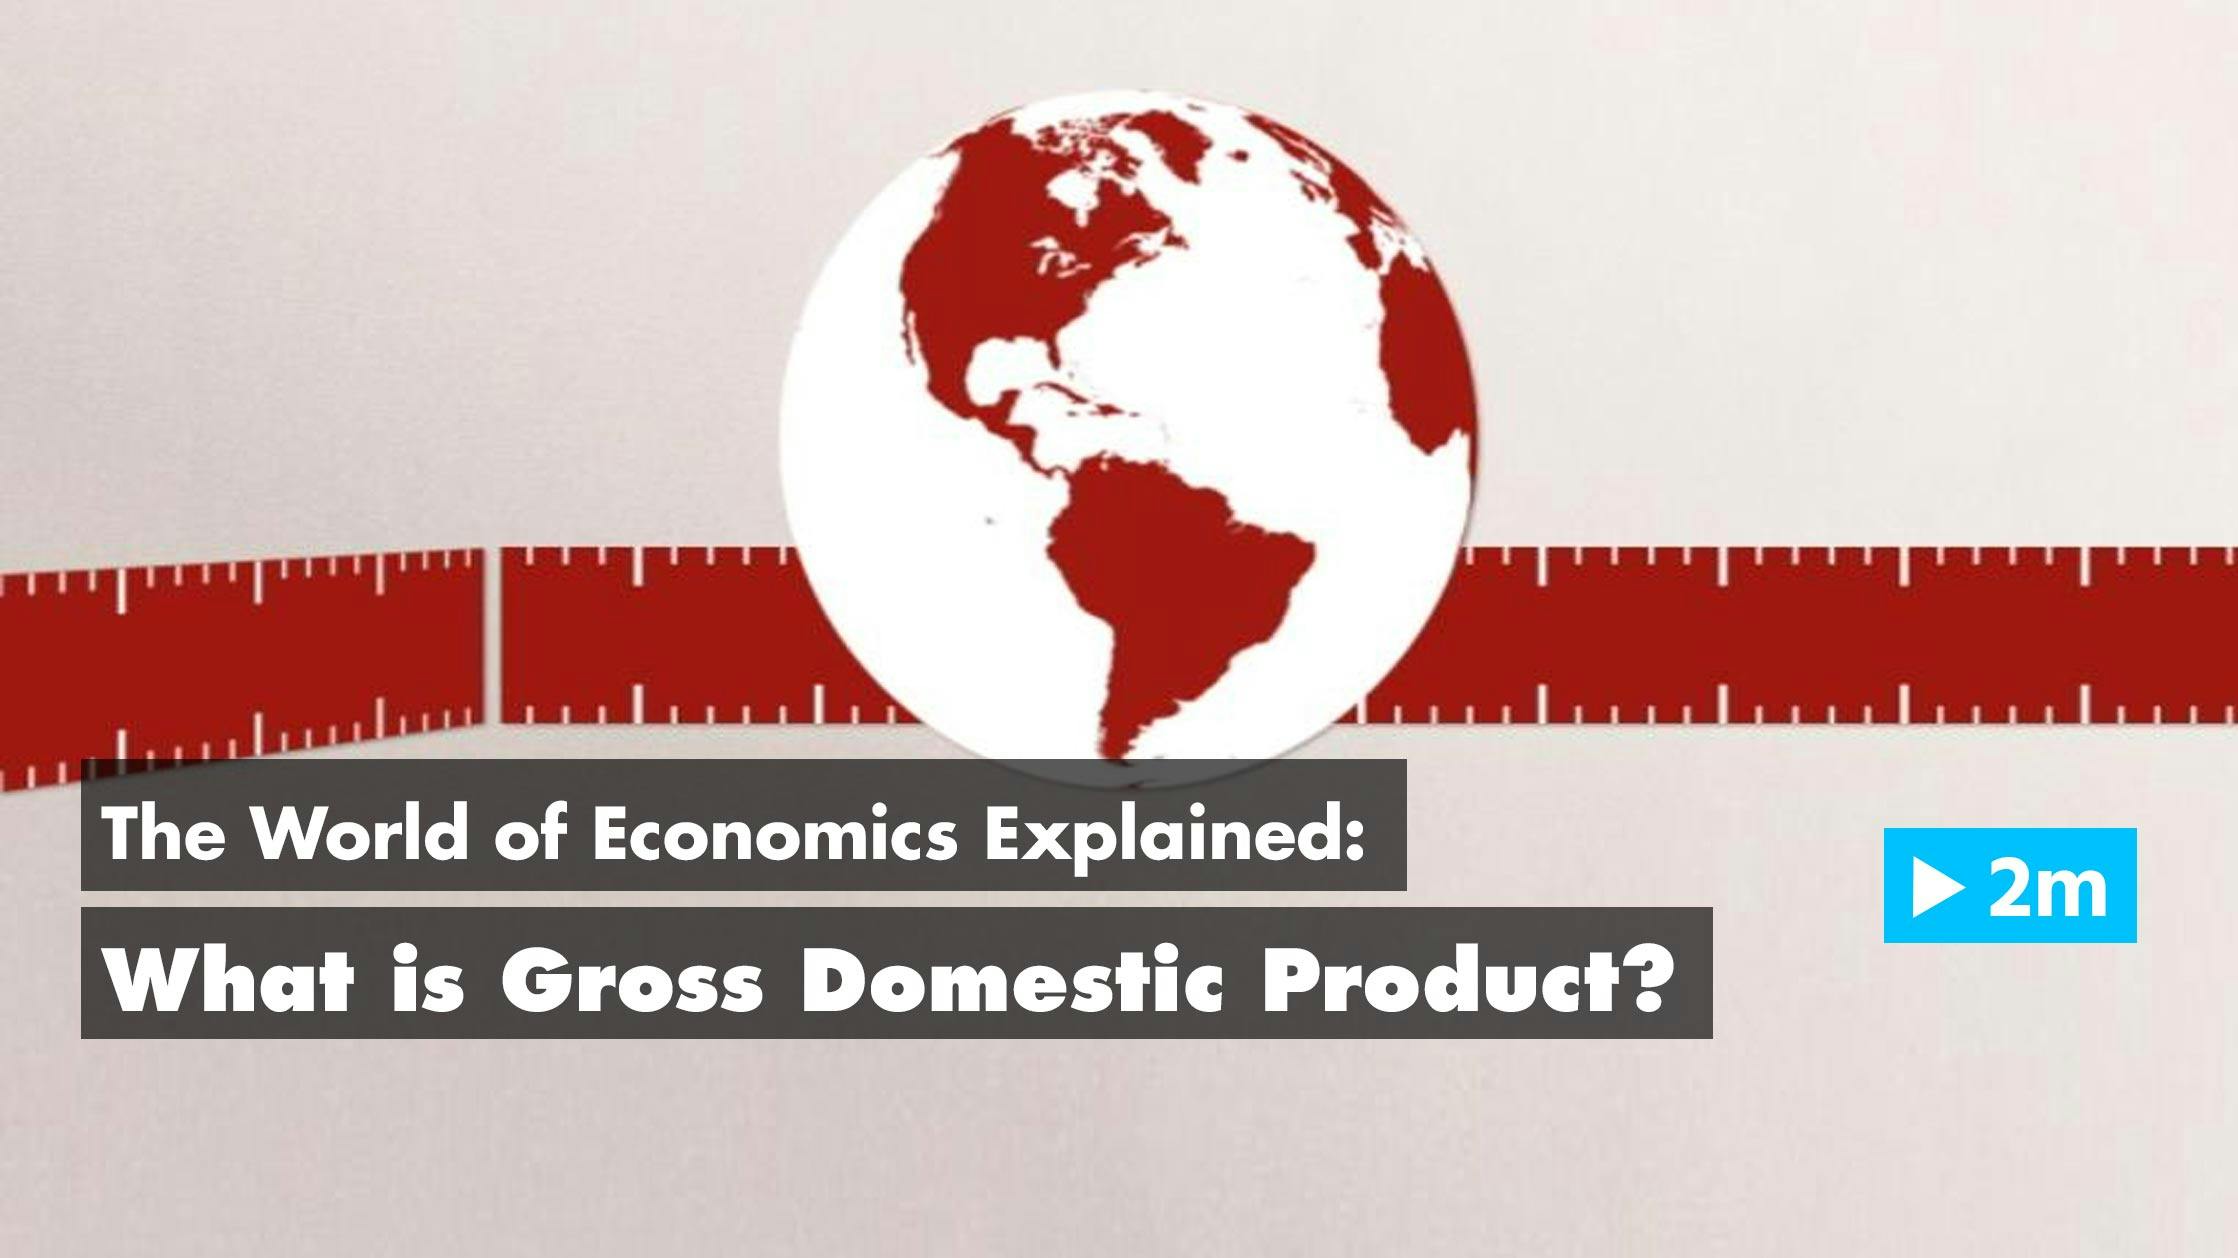 The World of Economics Explained: What is Gross Domestic Product?